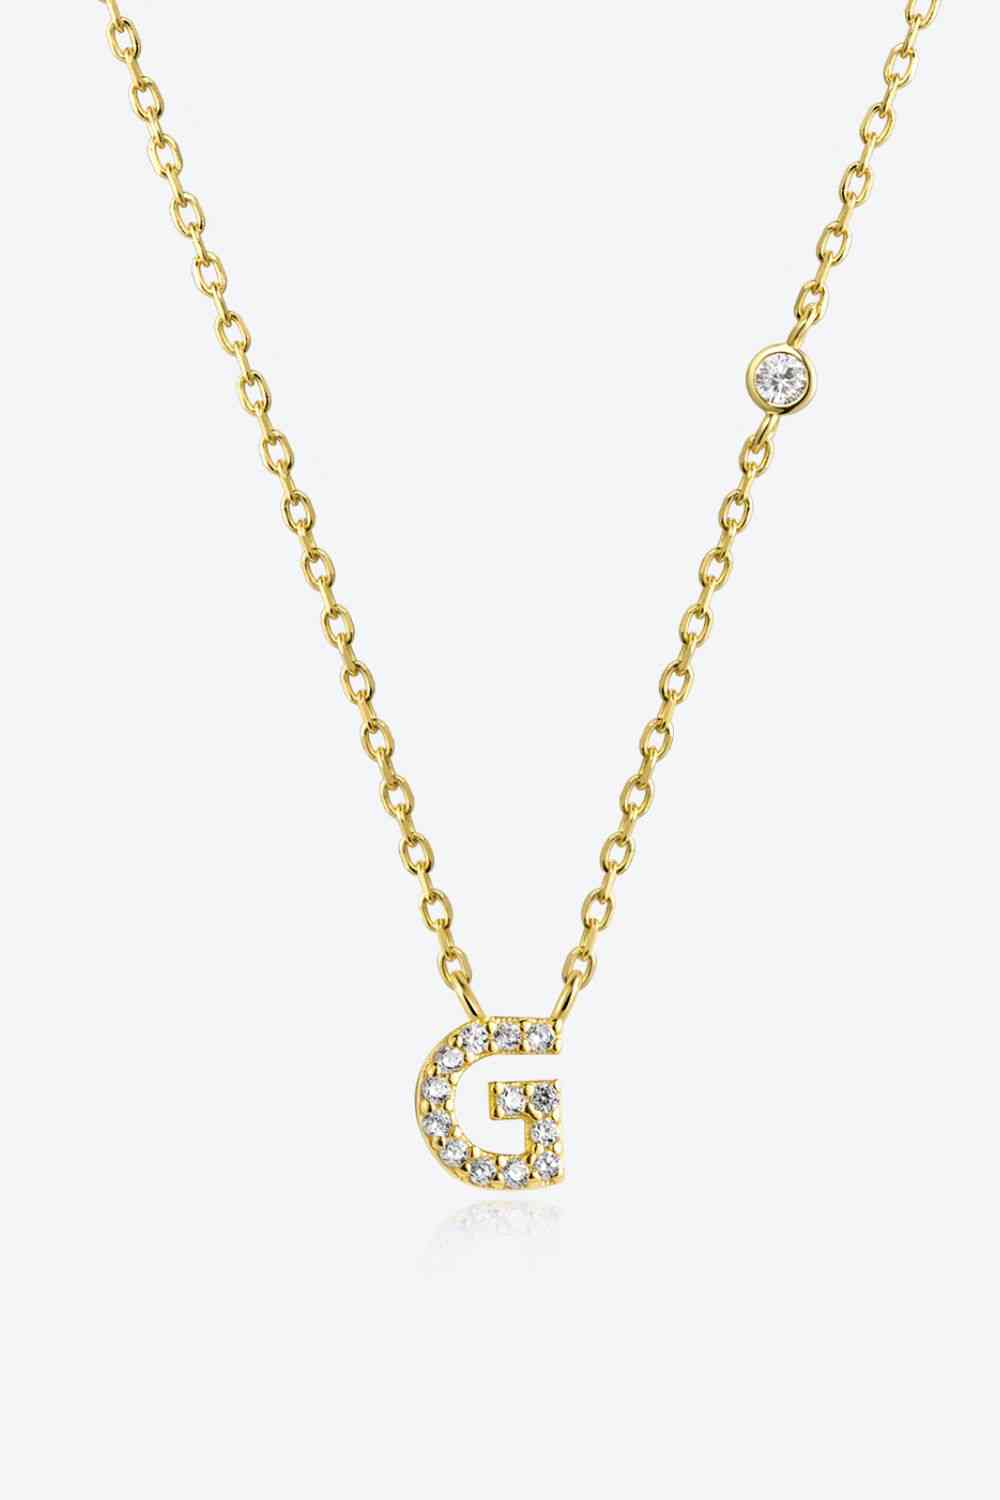 White Zircon Studded Initial Pendant Necklace G to K